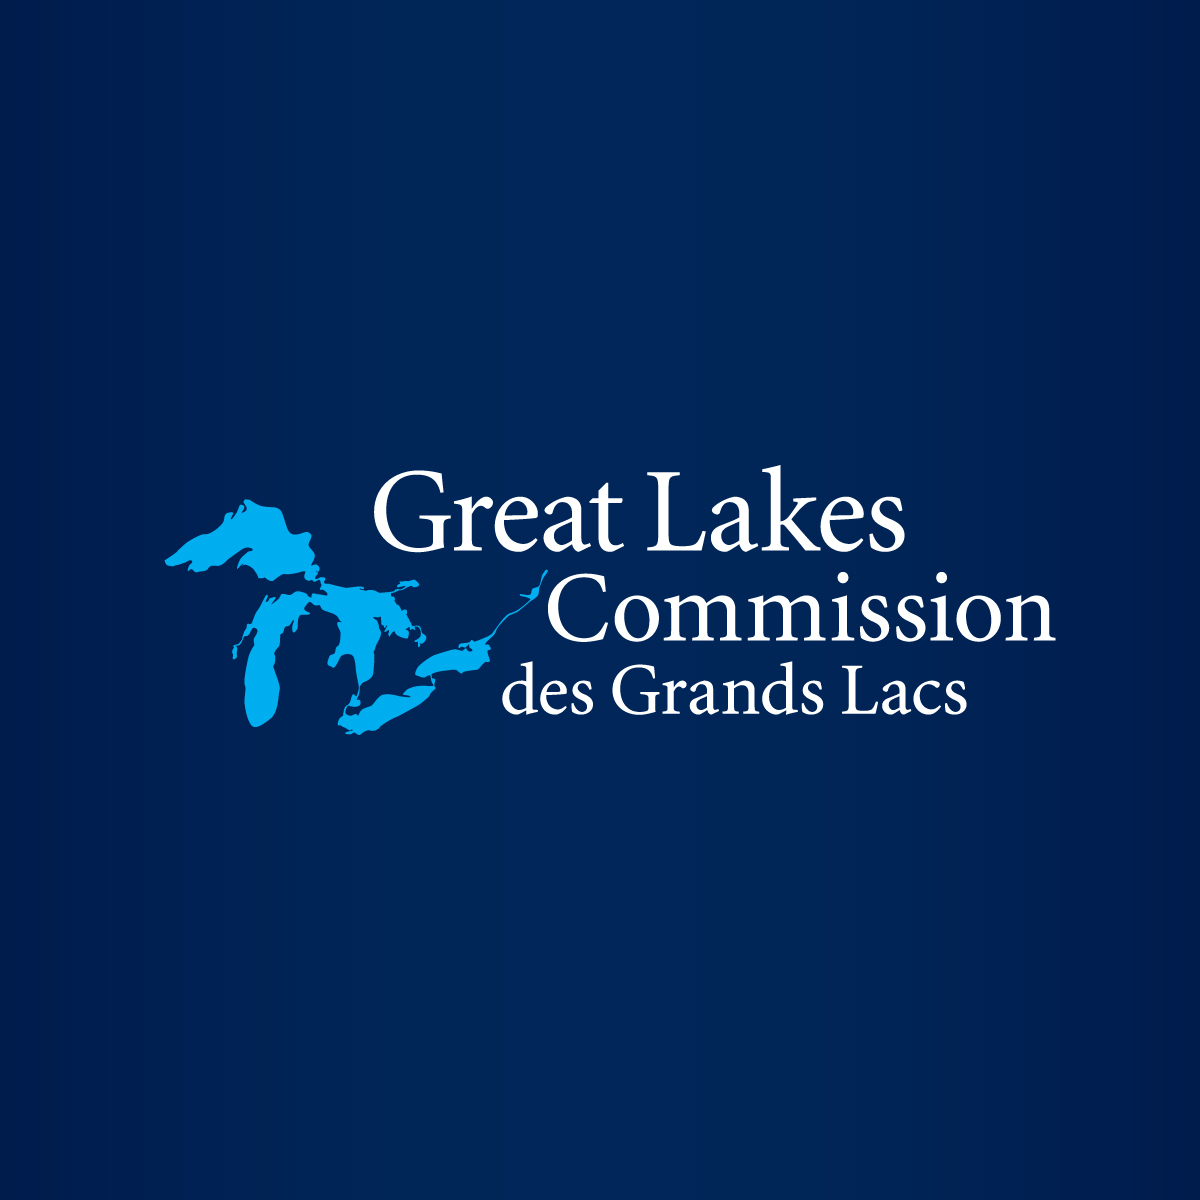 u s house approves great lakes fish and wildlife restoration act